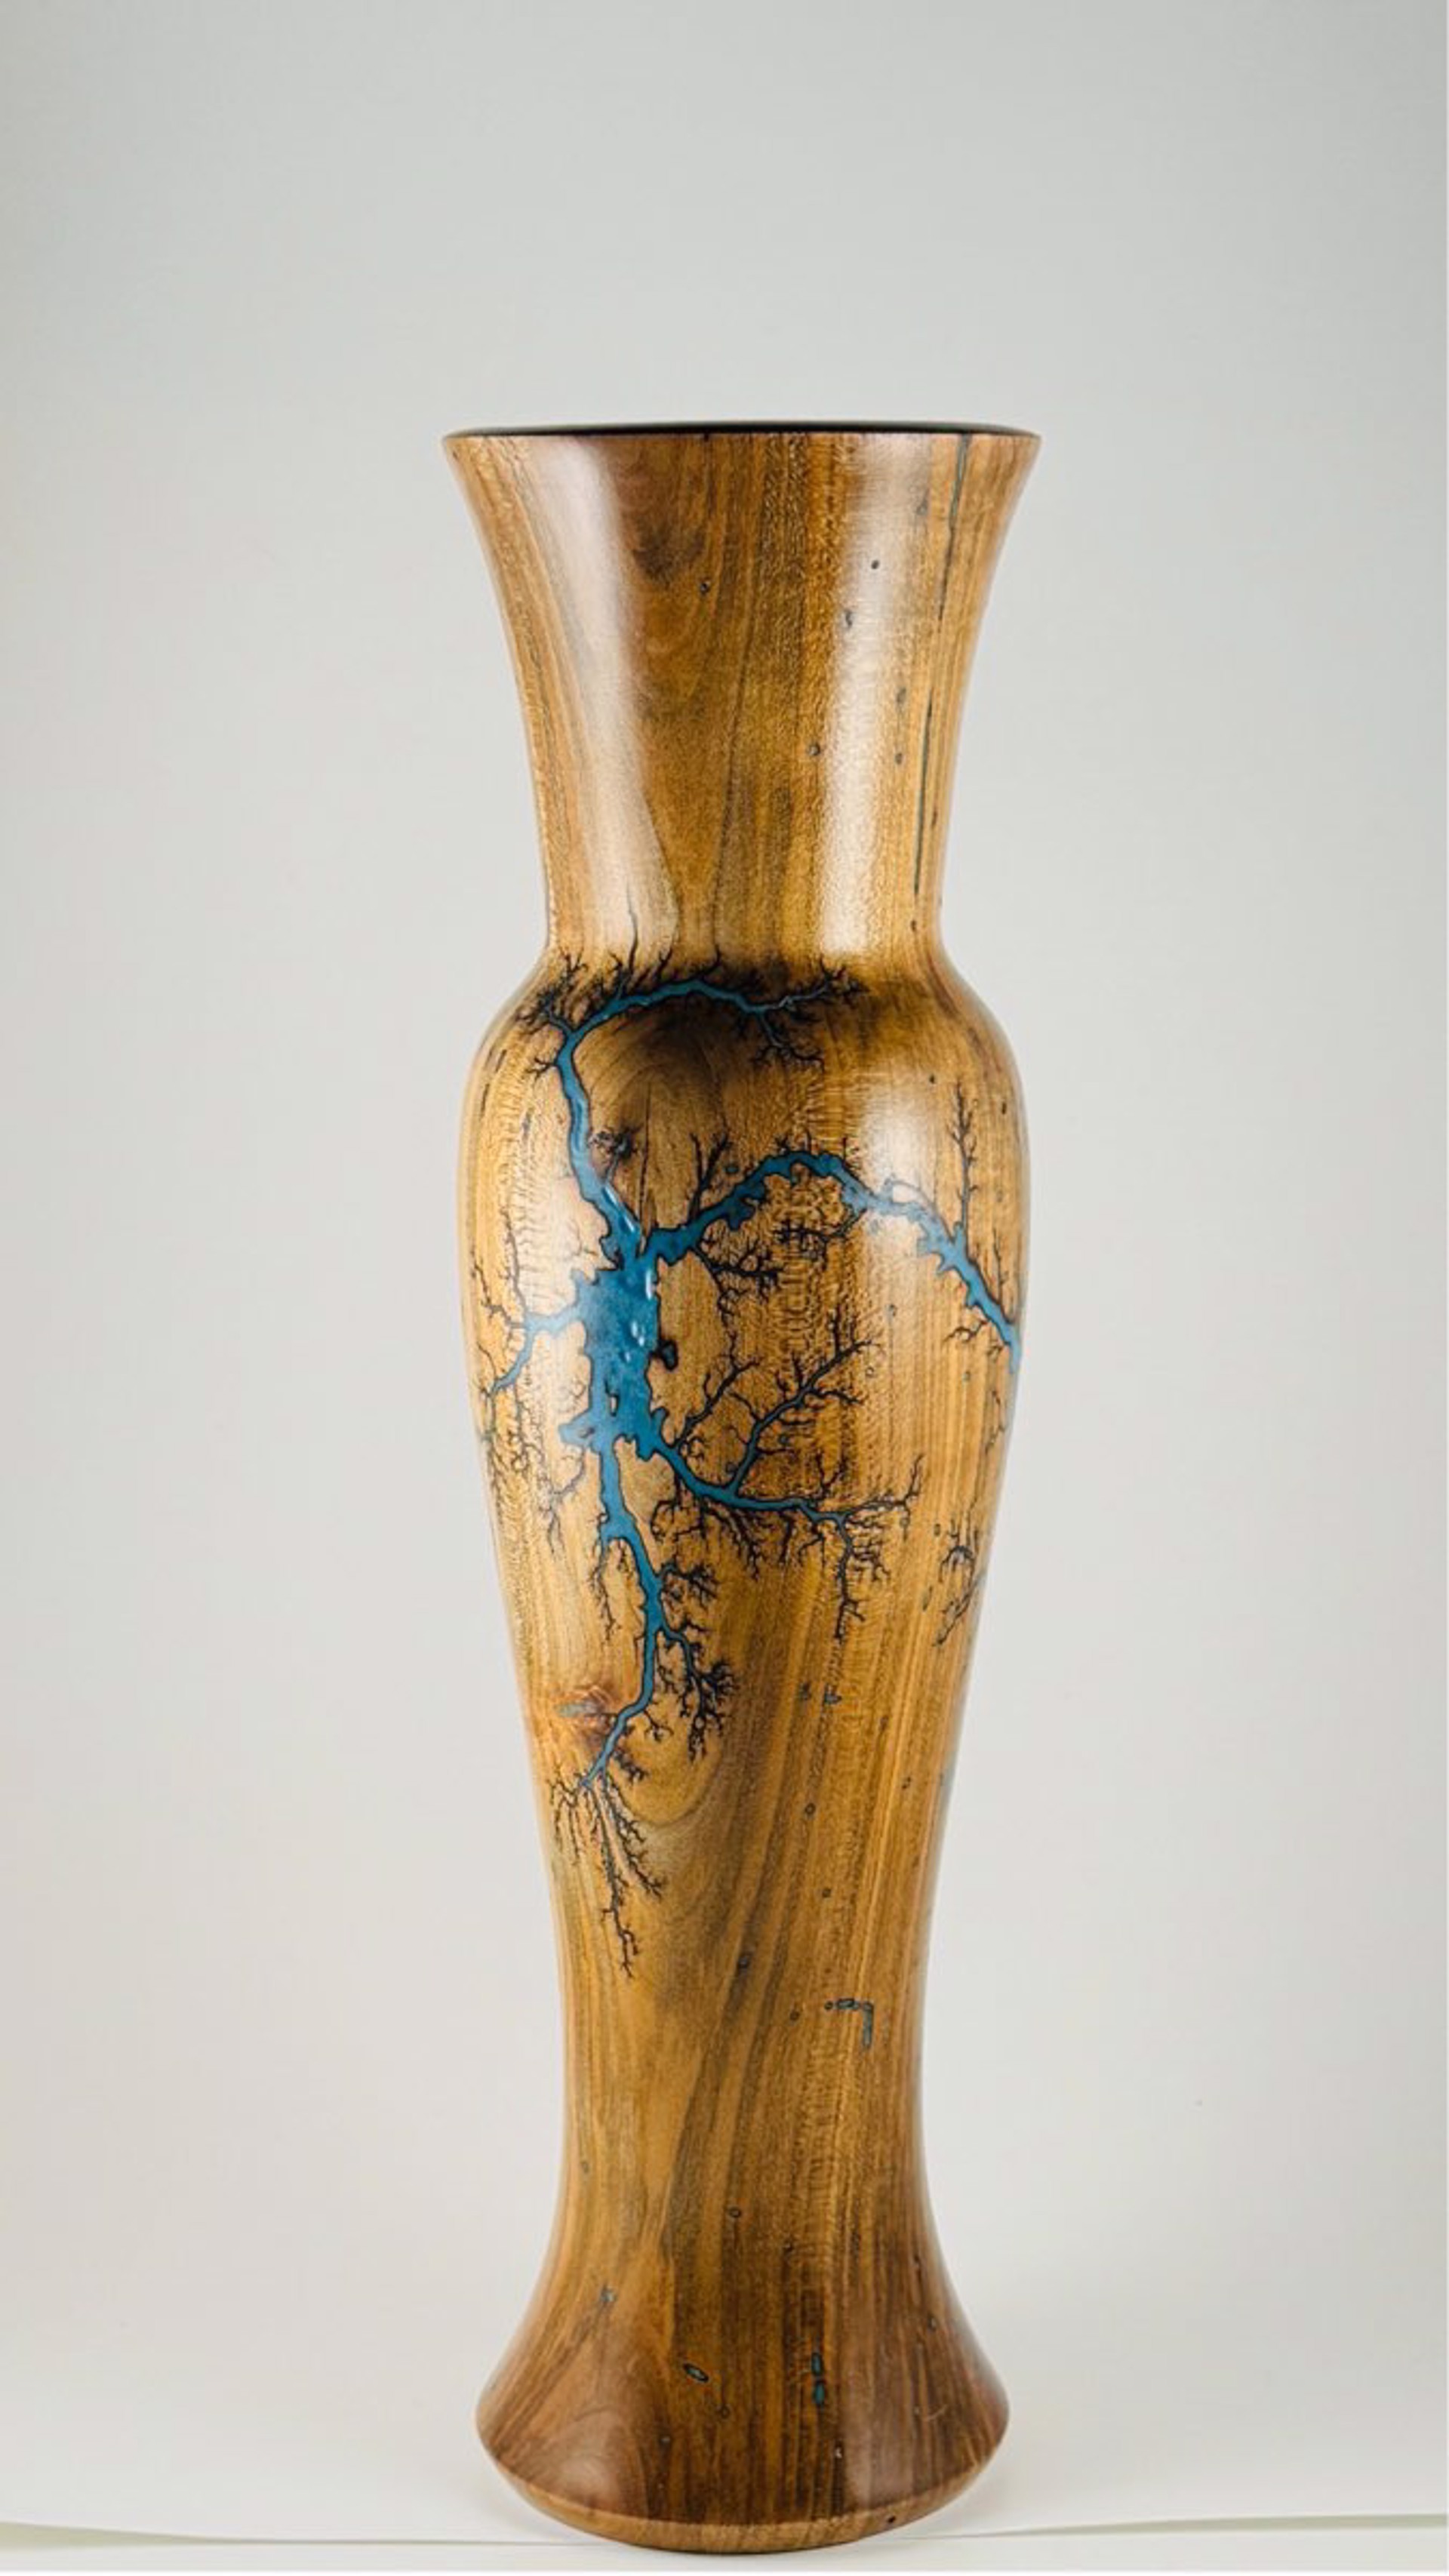 Vase HB23-43 by Hart Brothers